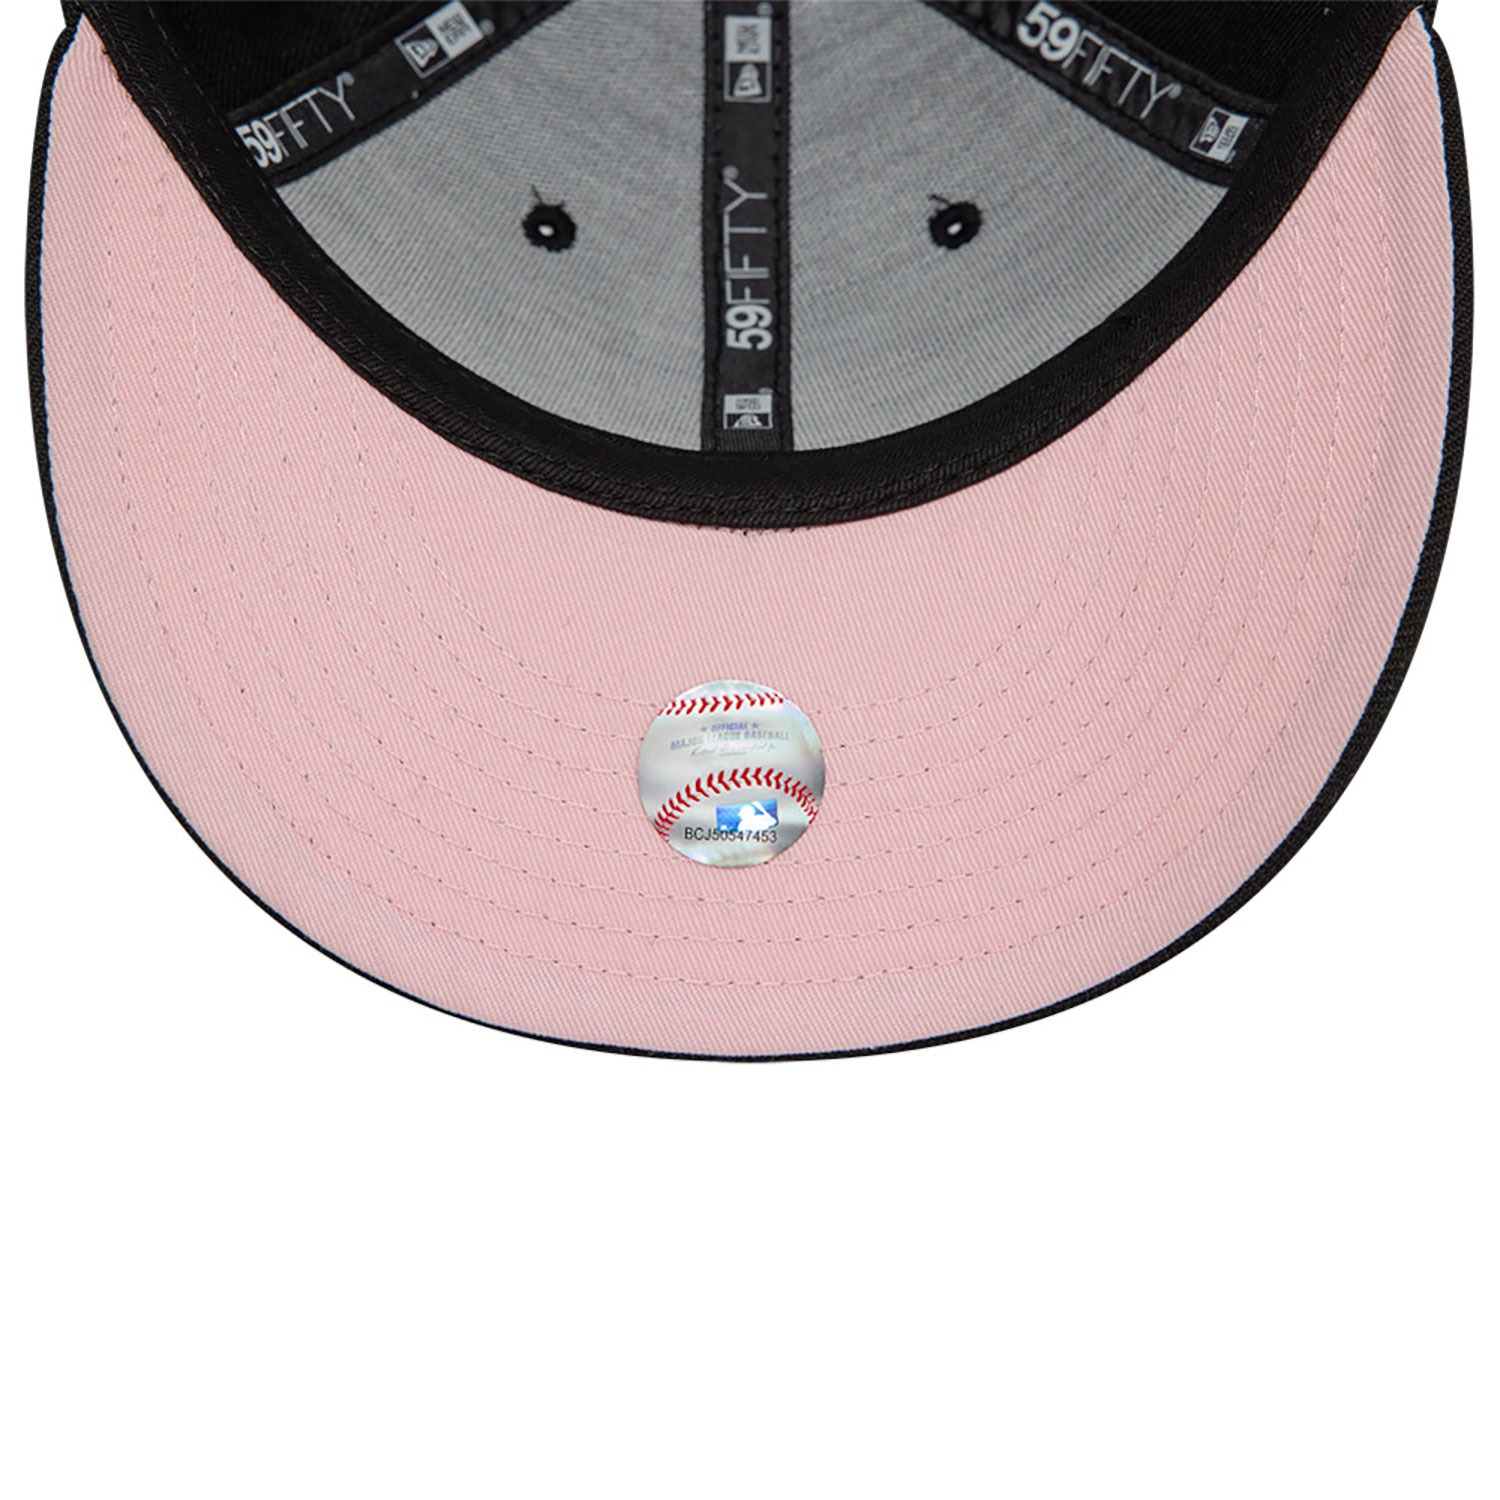 Chicago White Sox Cherry Blossom Black Low Profile 59FIFTY Fitted Cap